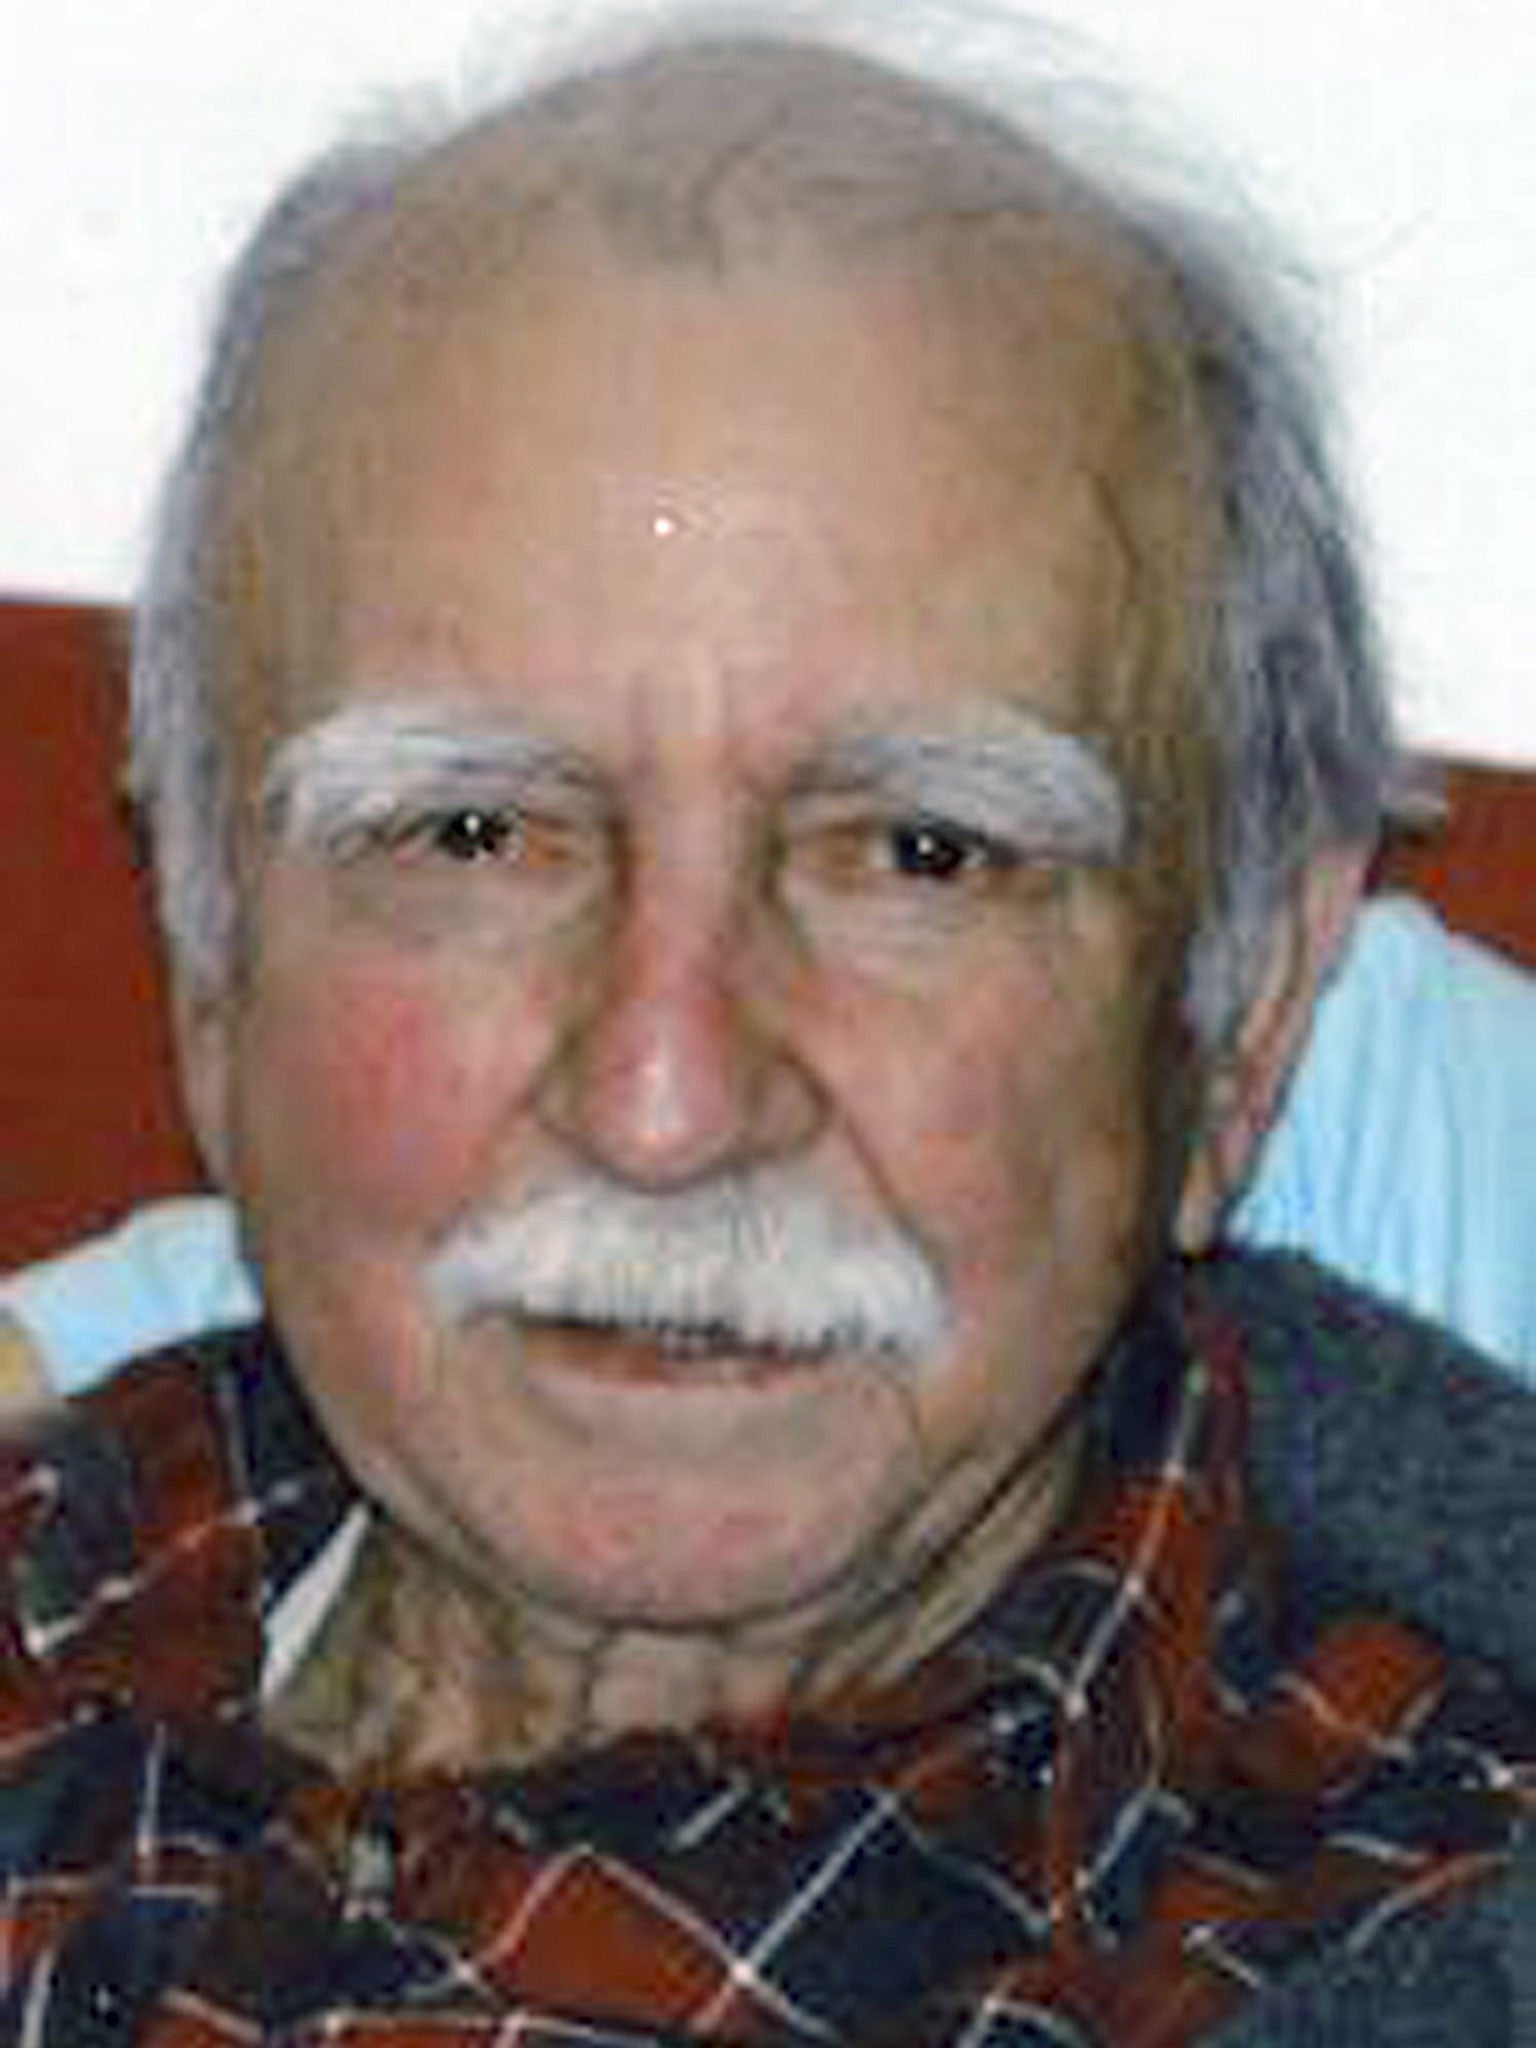 Ronald Read, a former gas station employee and janitor who died in June 2014 at age 92